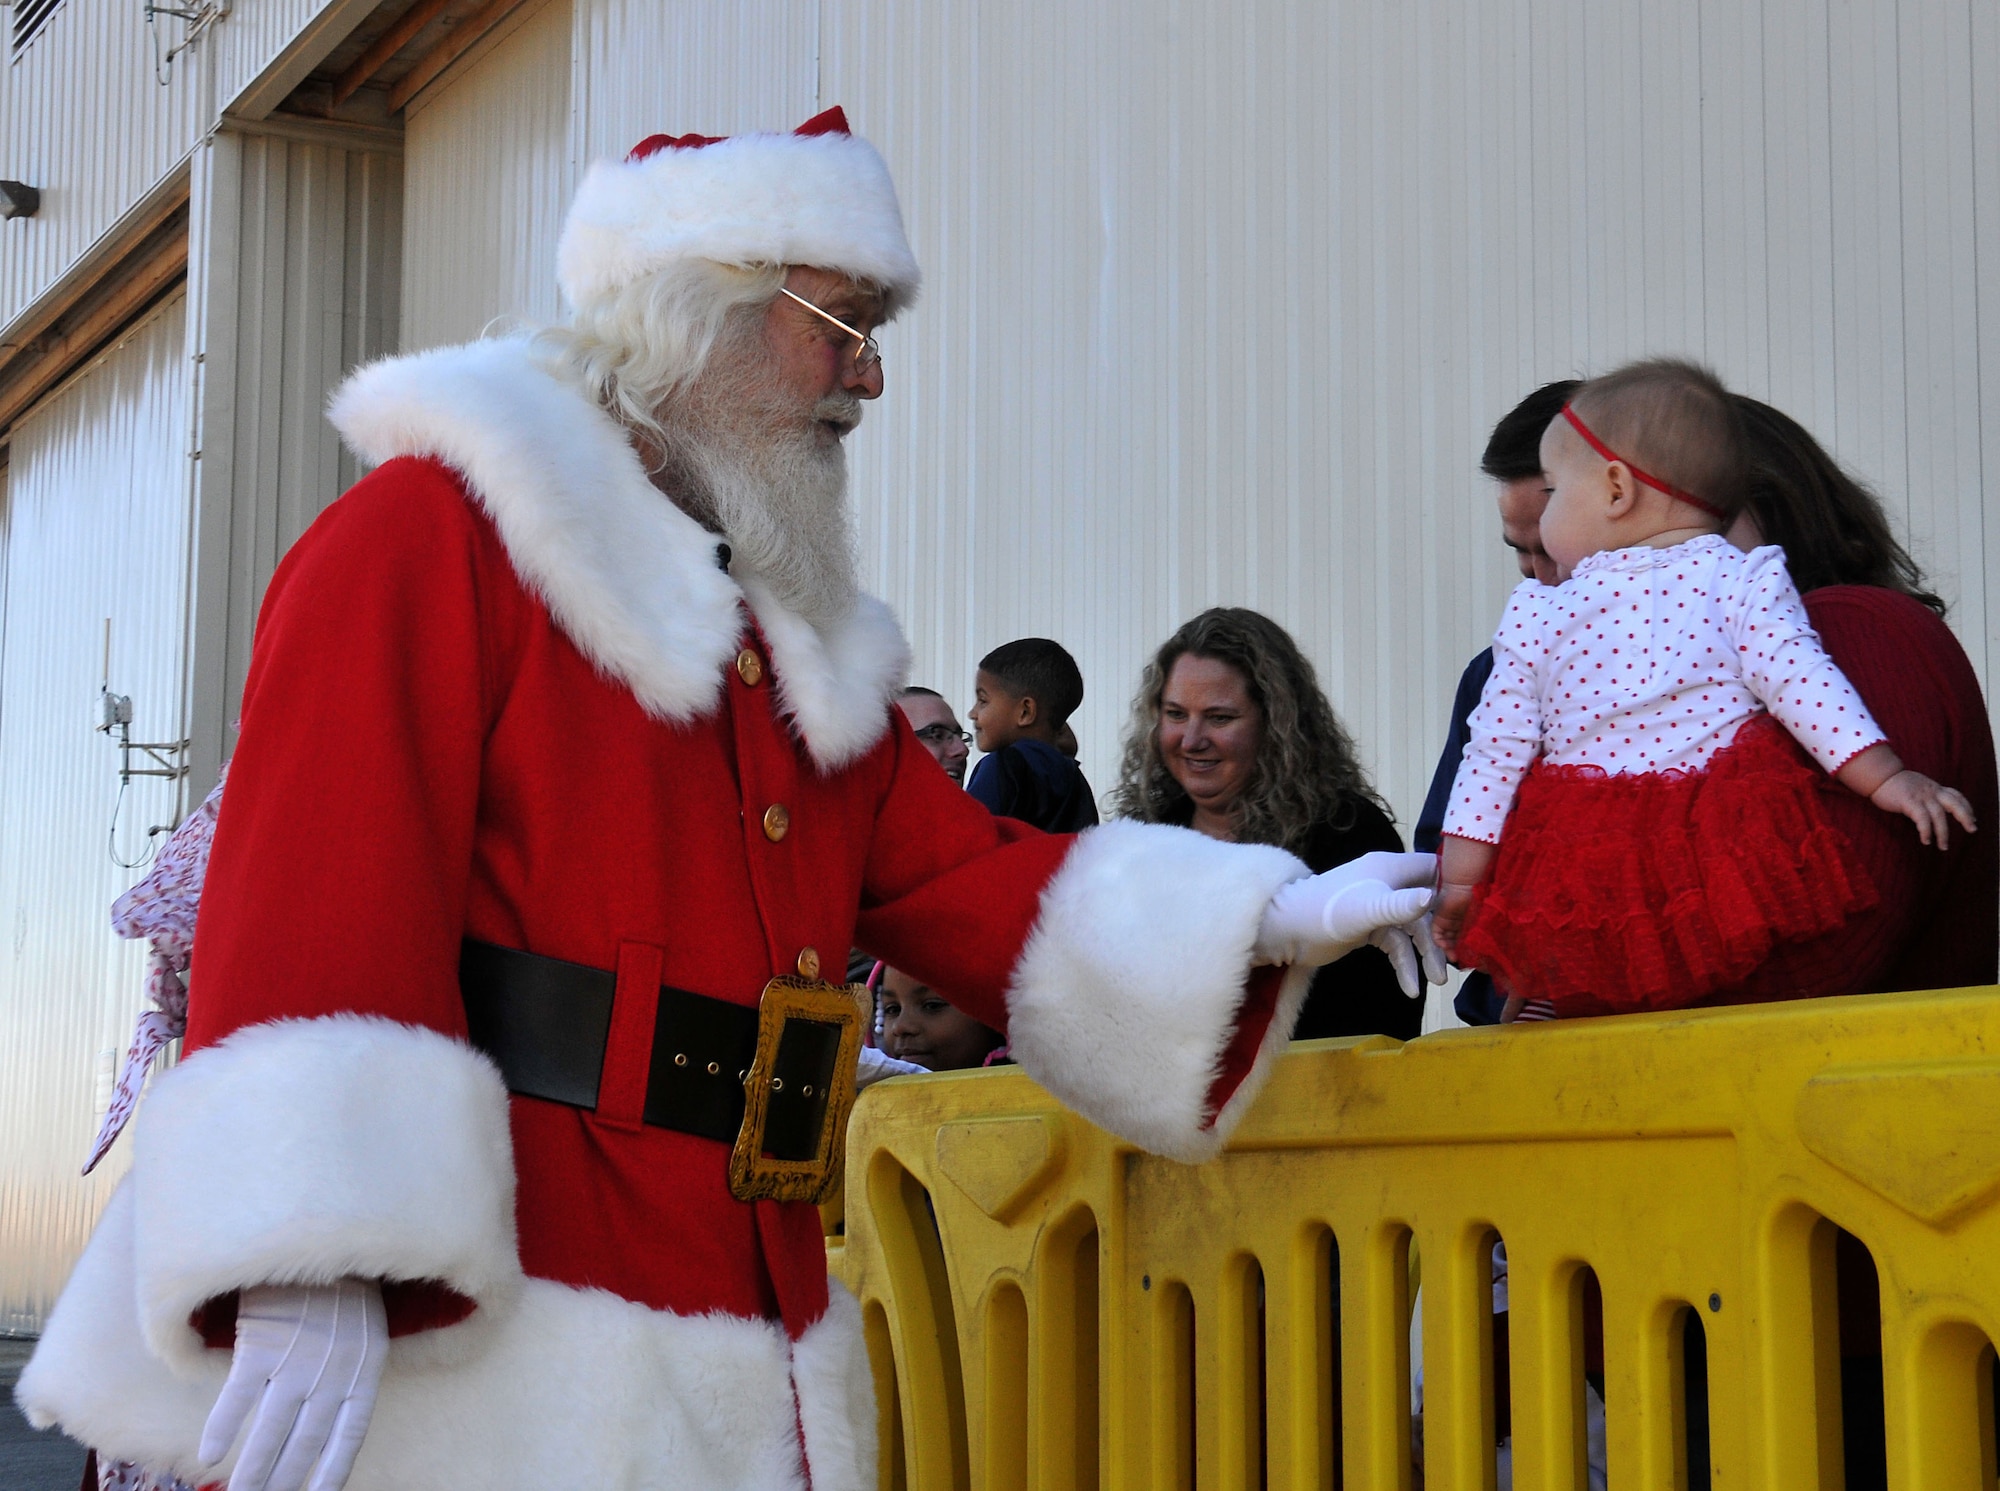 Santa Claus greets a young devotee outside Hangar 5 at Dobbins Air Reserve Base, Ga. on Dec. 5, 2015. Claus took time to shake hands and take pictures with family members waiting for him to arrive via a C-130 Hercules. (U.S. Air Force photo/Senior Airman Andrew Park)